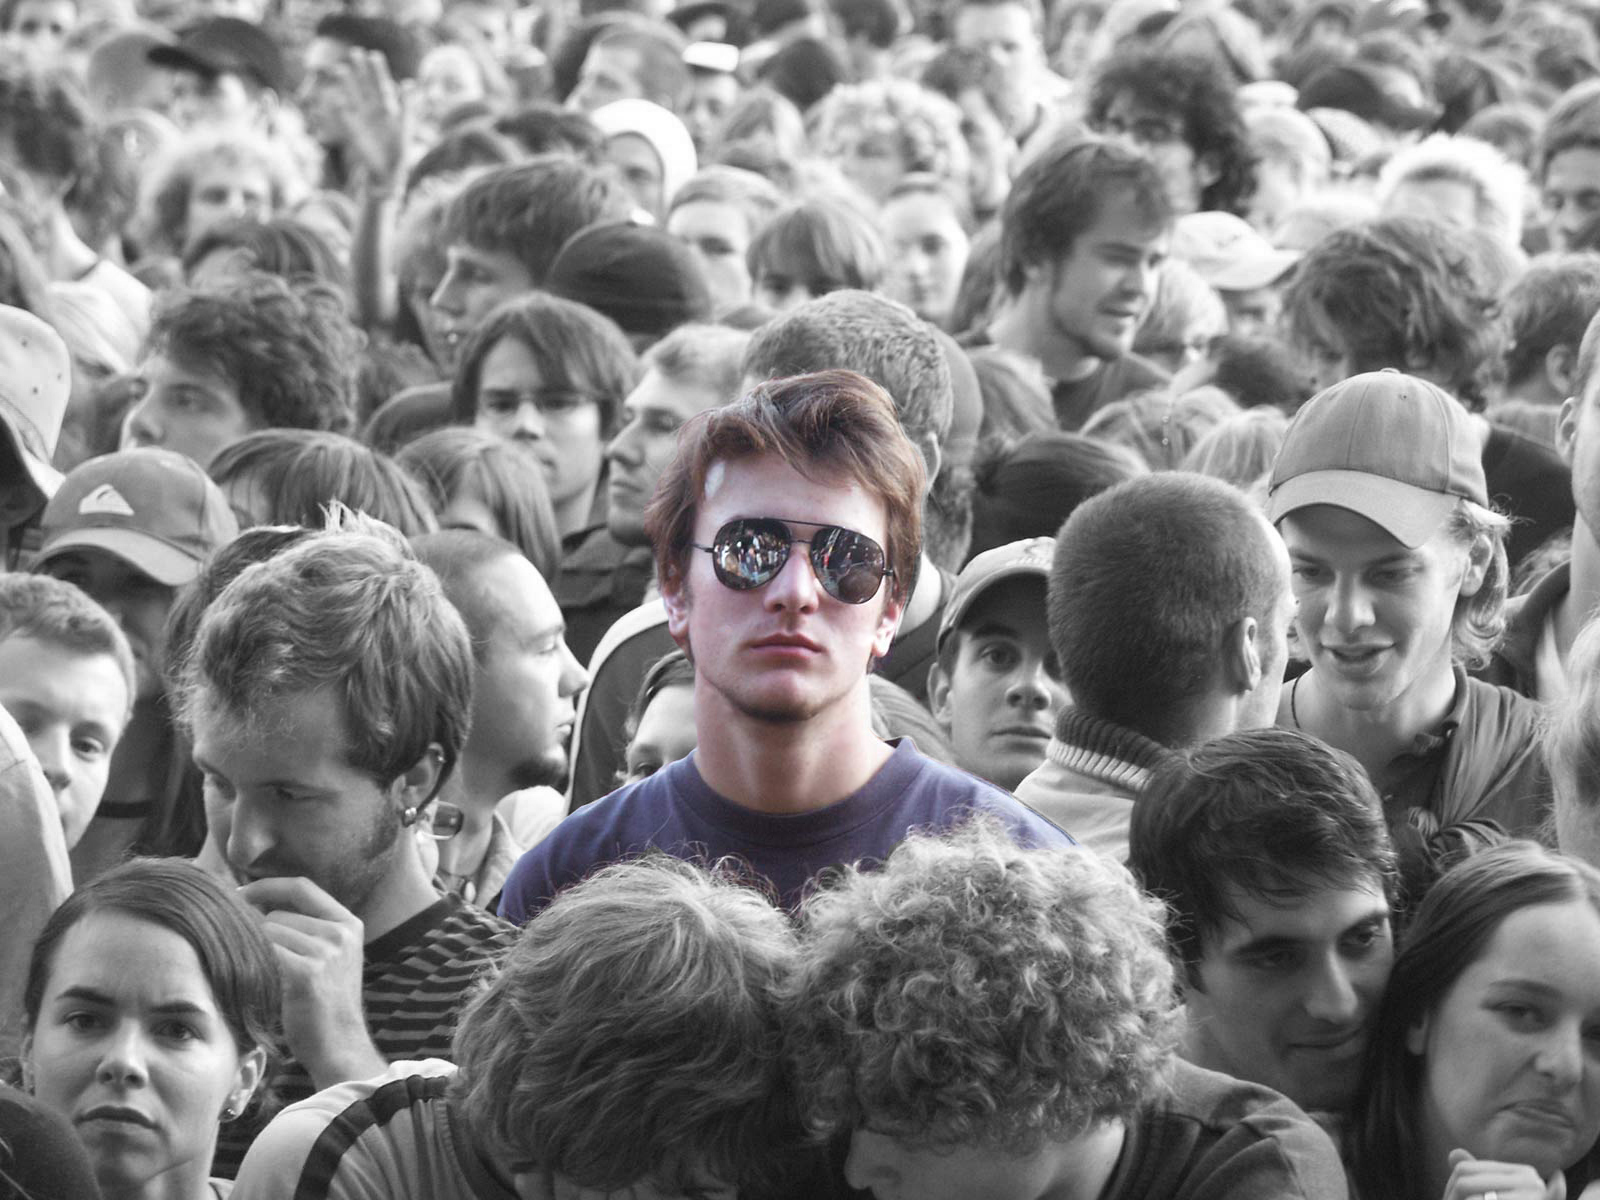 [Alone_in_the_Crowd_by_Cunny1988.jpg]